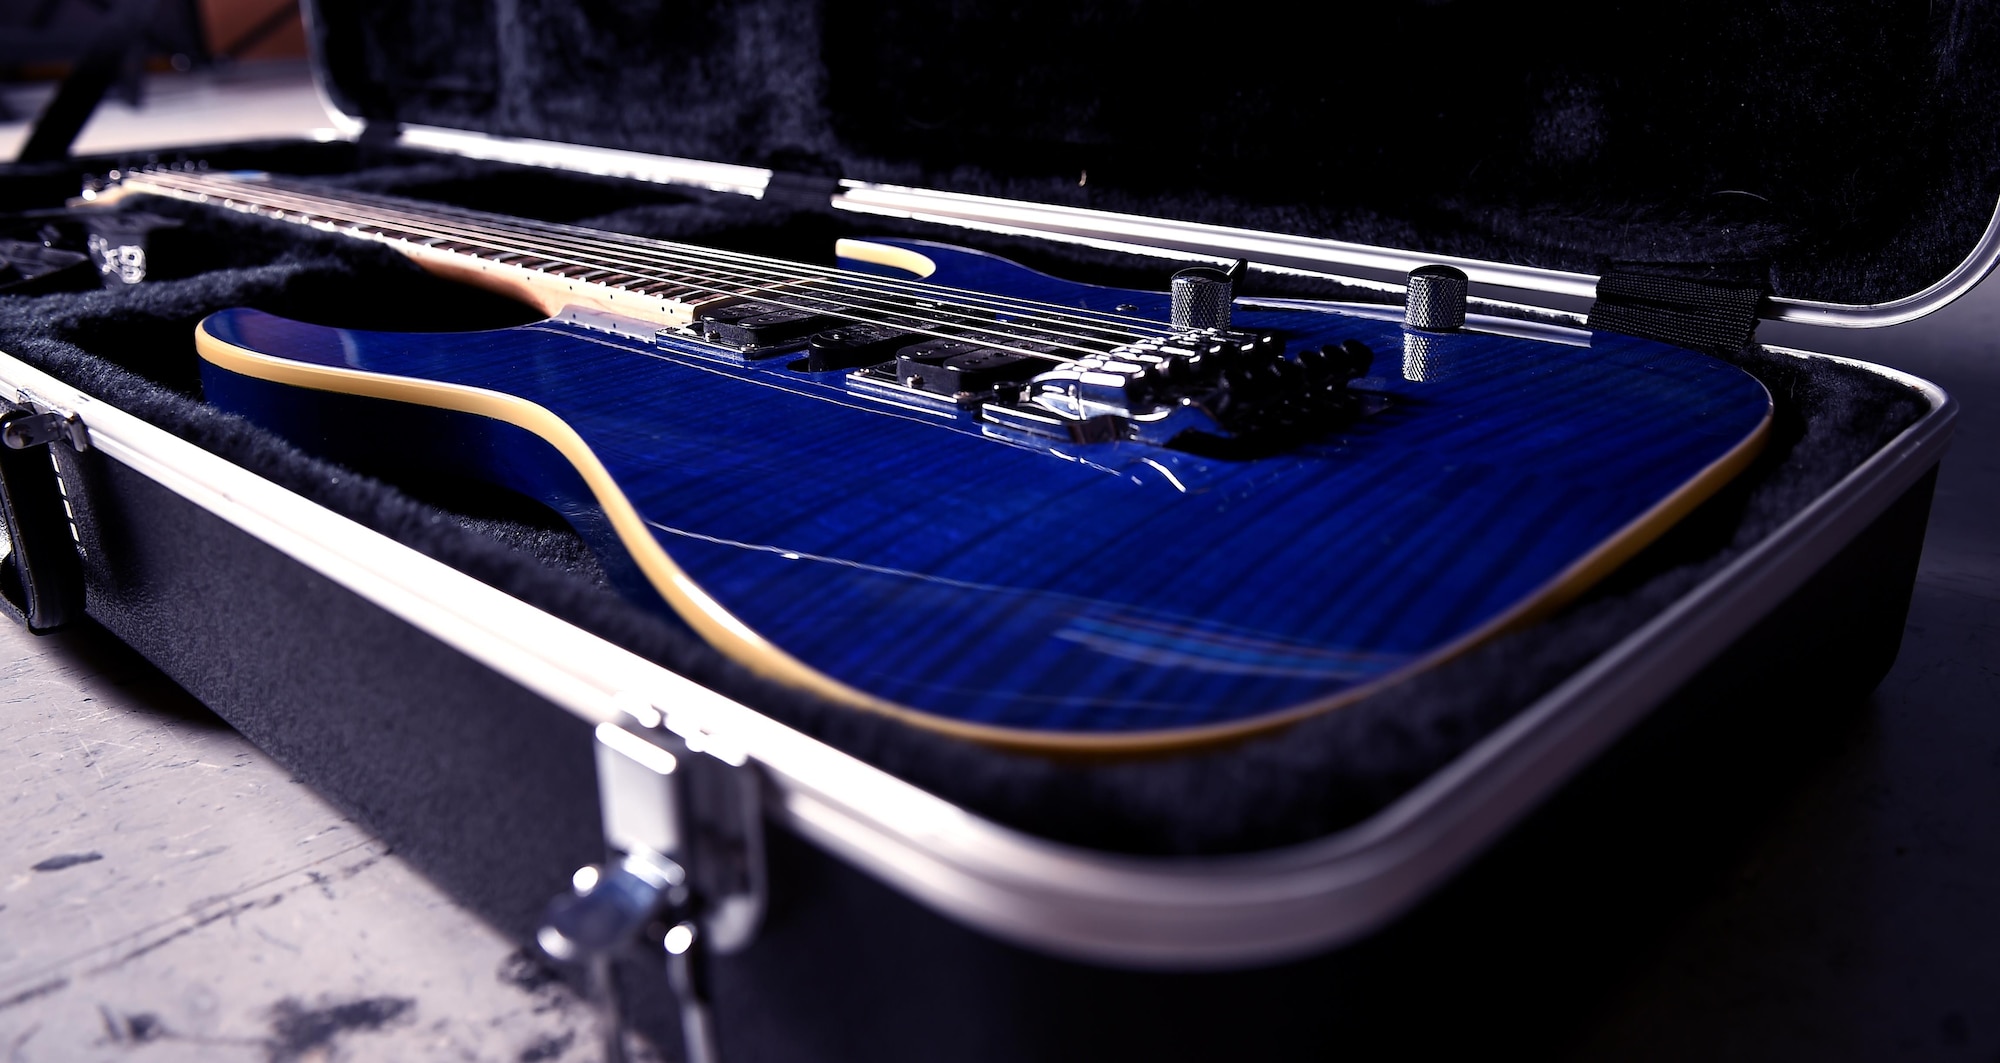 Airman 1st Class Zacary Heinzerling, 460th Security Forces Squadron apprentice, displays his 2009 transparent blue Ibanez guitar September 8, 2016, at Buckley Air Force Base, Colo. This guitar is one of nine owned by Heinzerling, who has been playing music since he was 10 years old. (U.S. Air Force photo by Airman Holden S. Faul/ Released) 